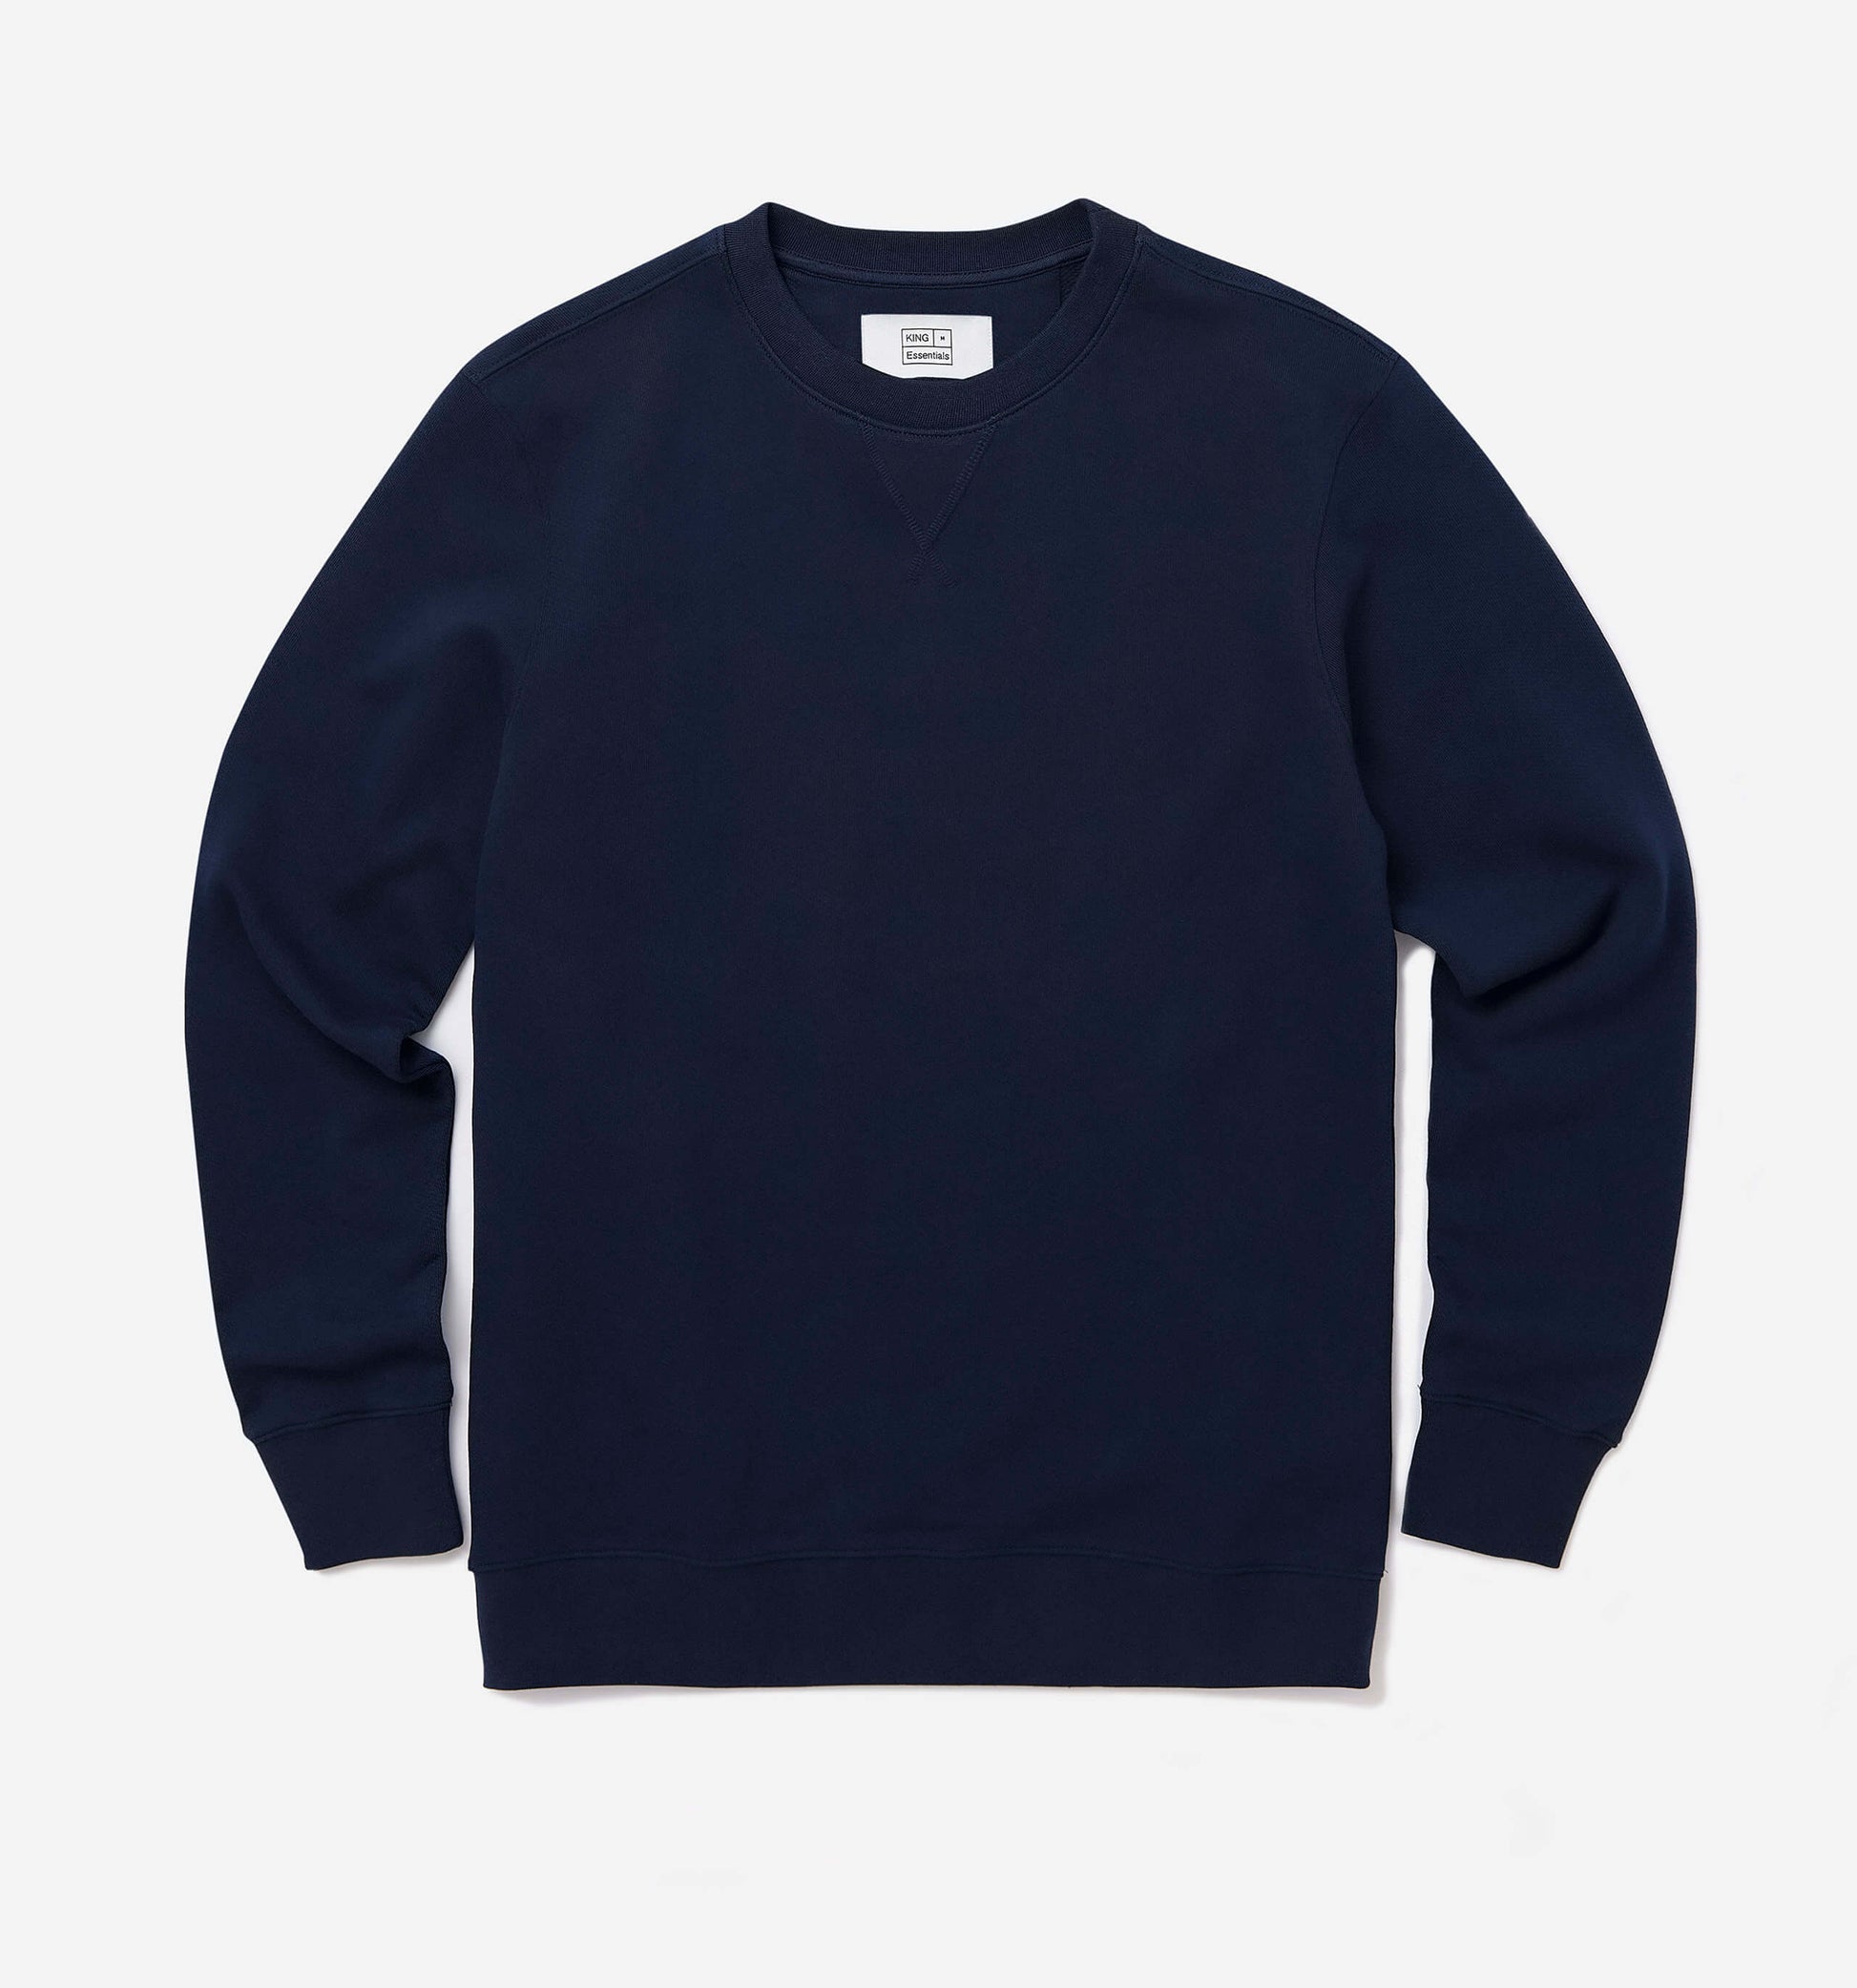 The George - French Terry Cotton Sweatshirt, Navy